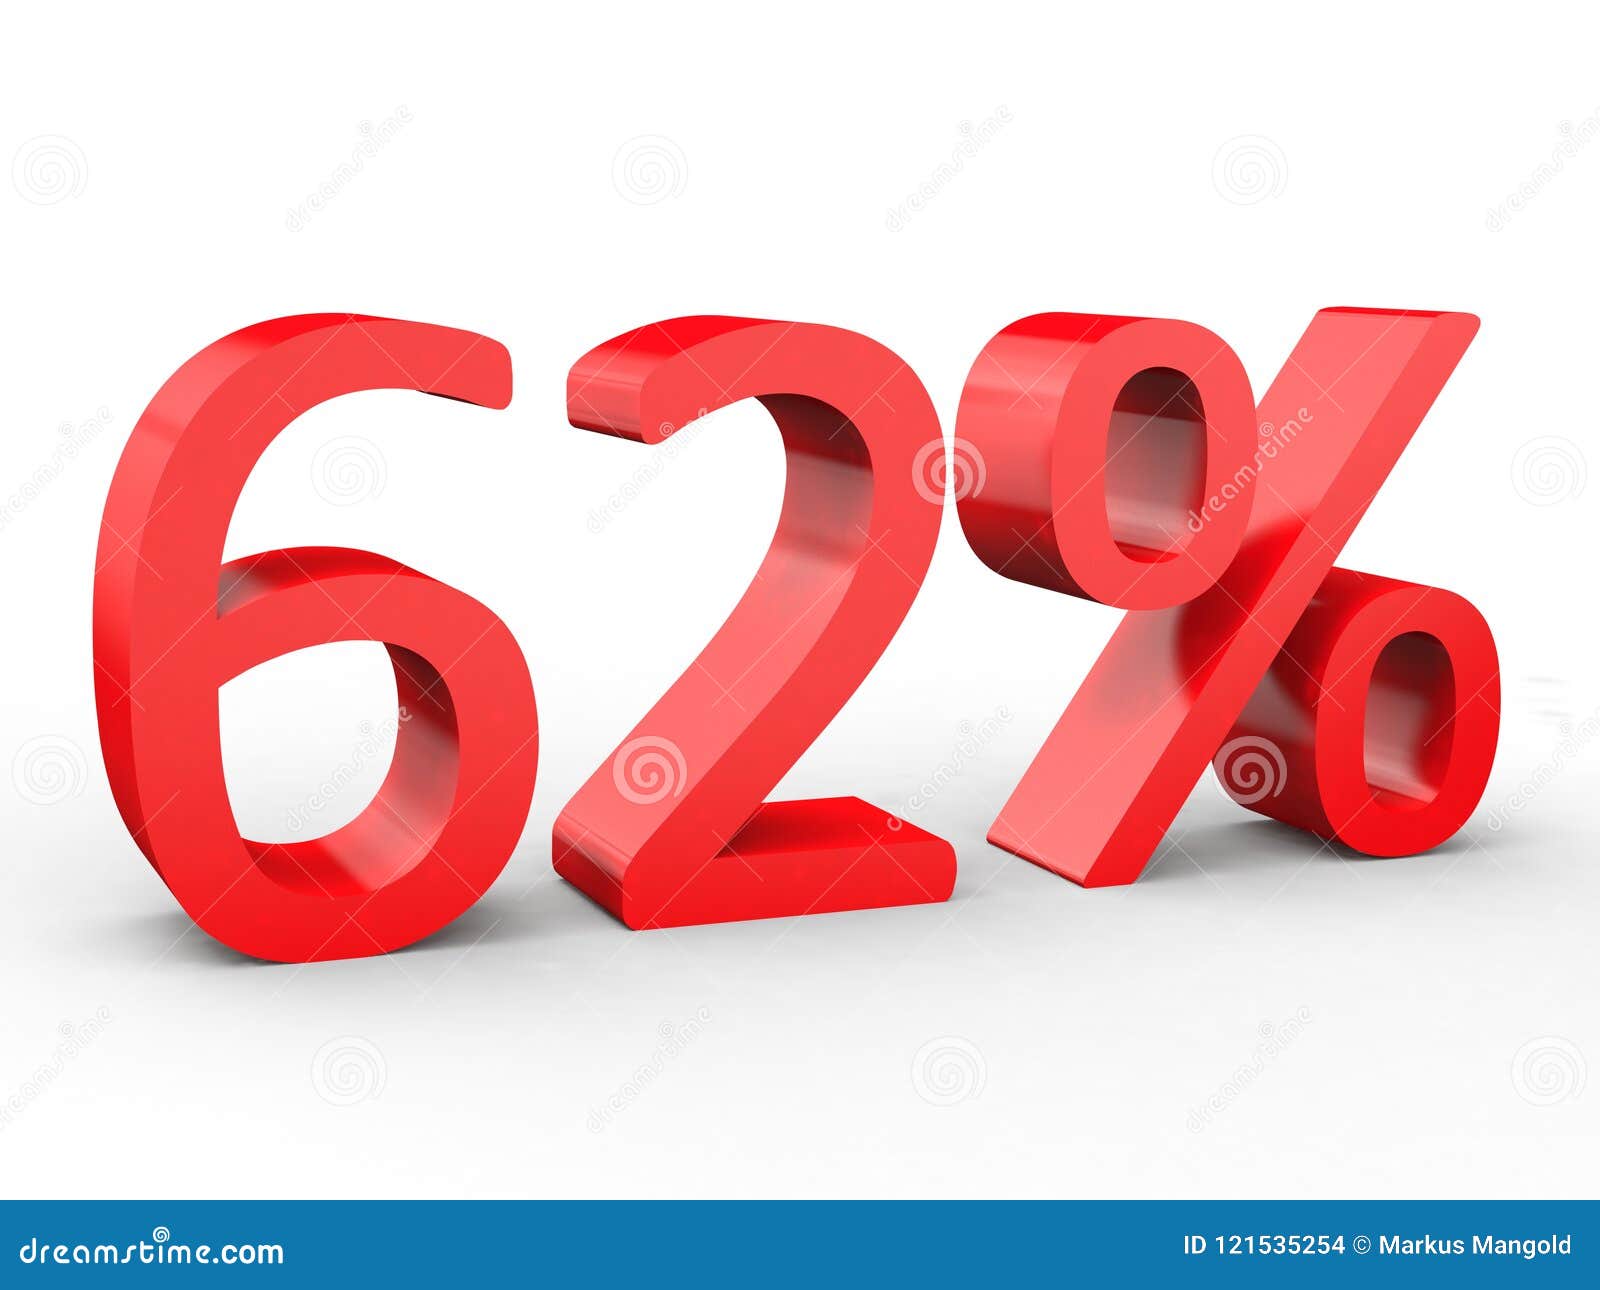 62 Percent Discount. Red 3d Numbers on Isolated White Background Stock